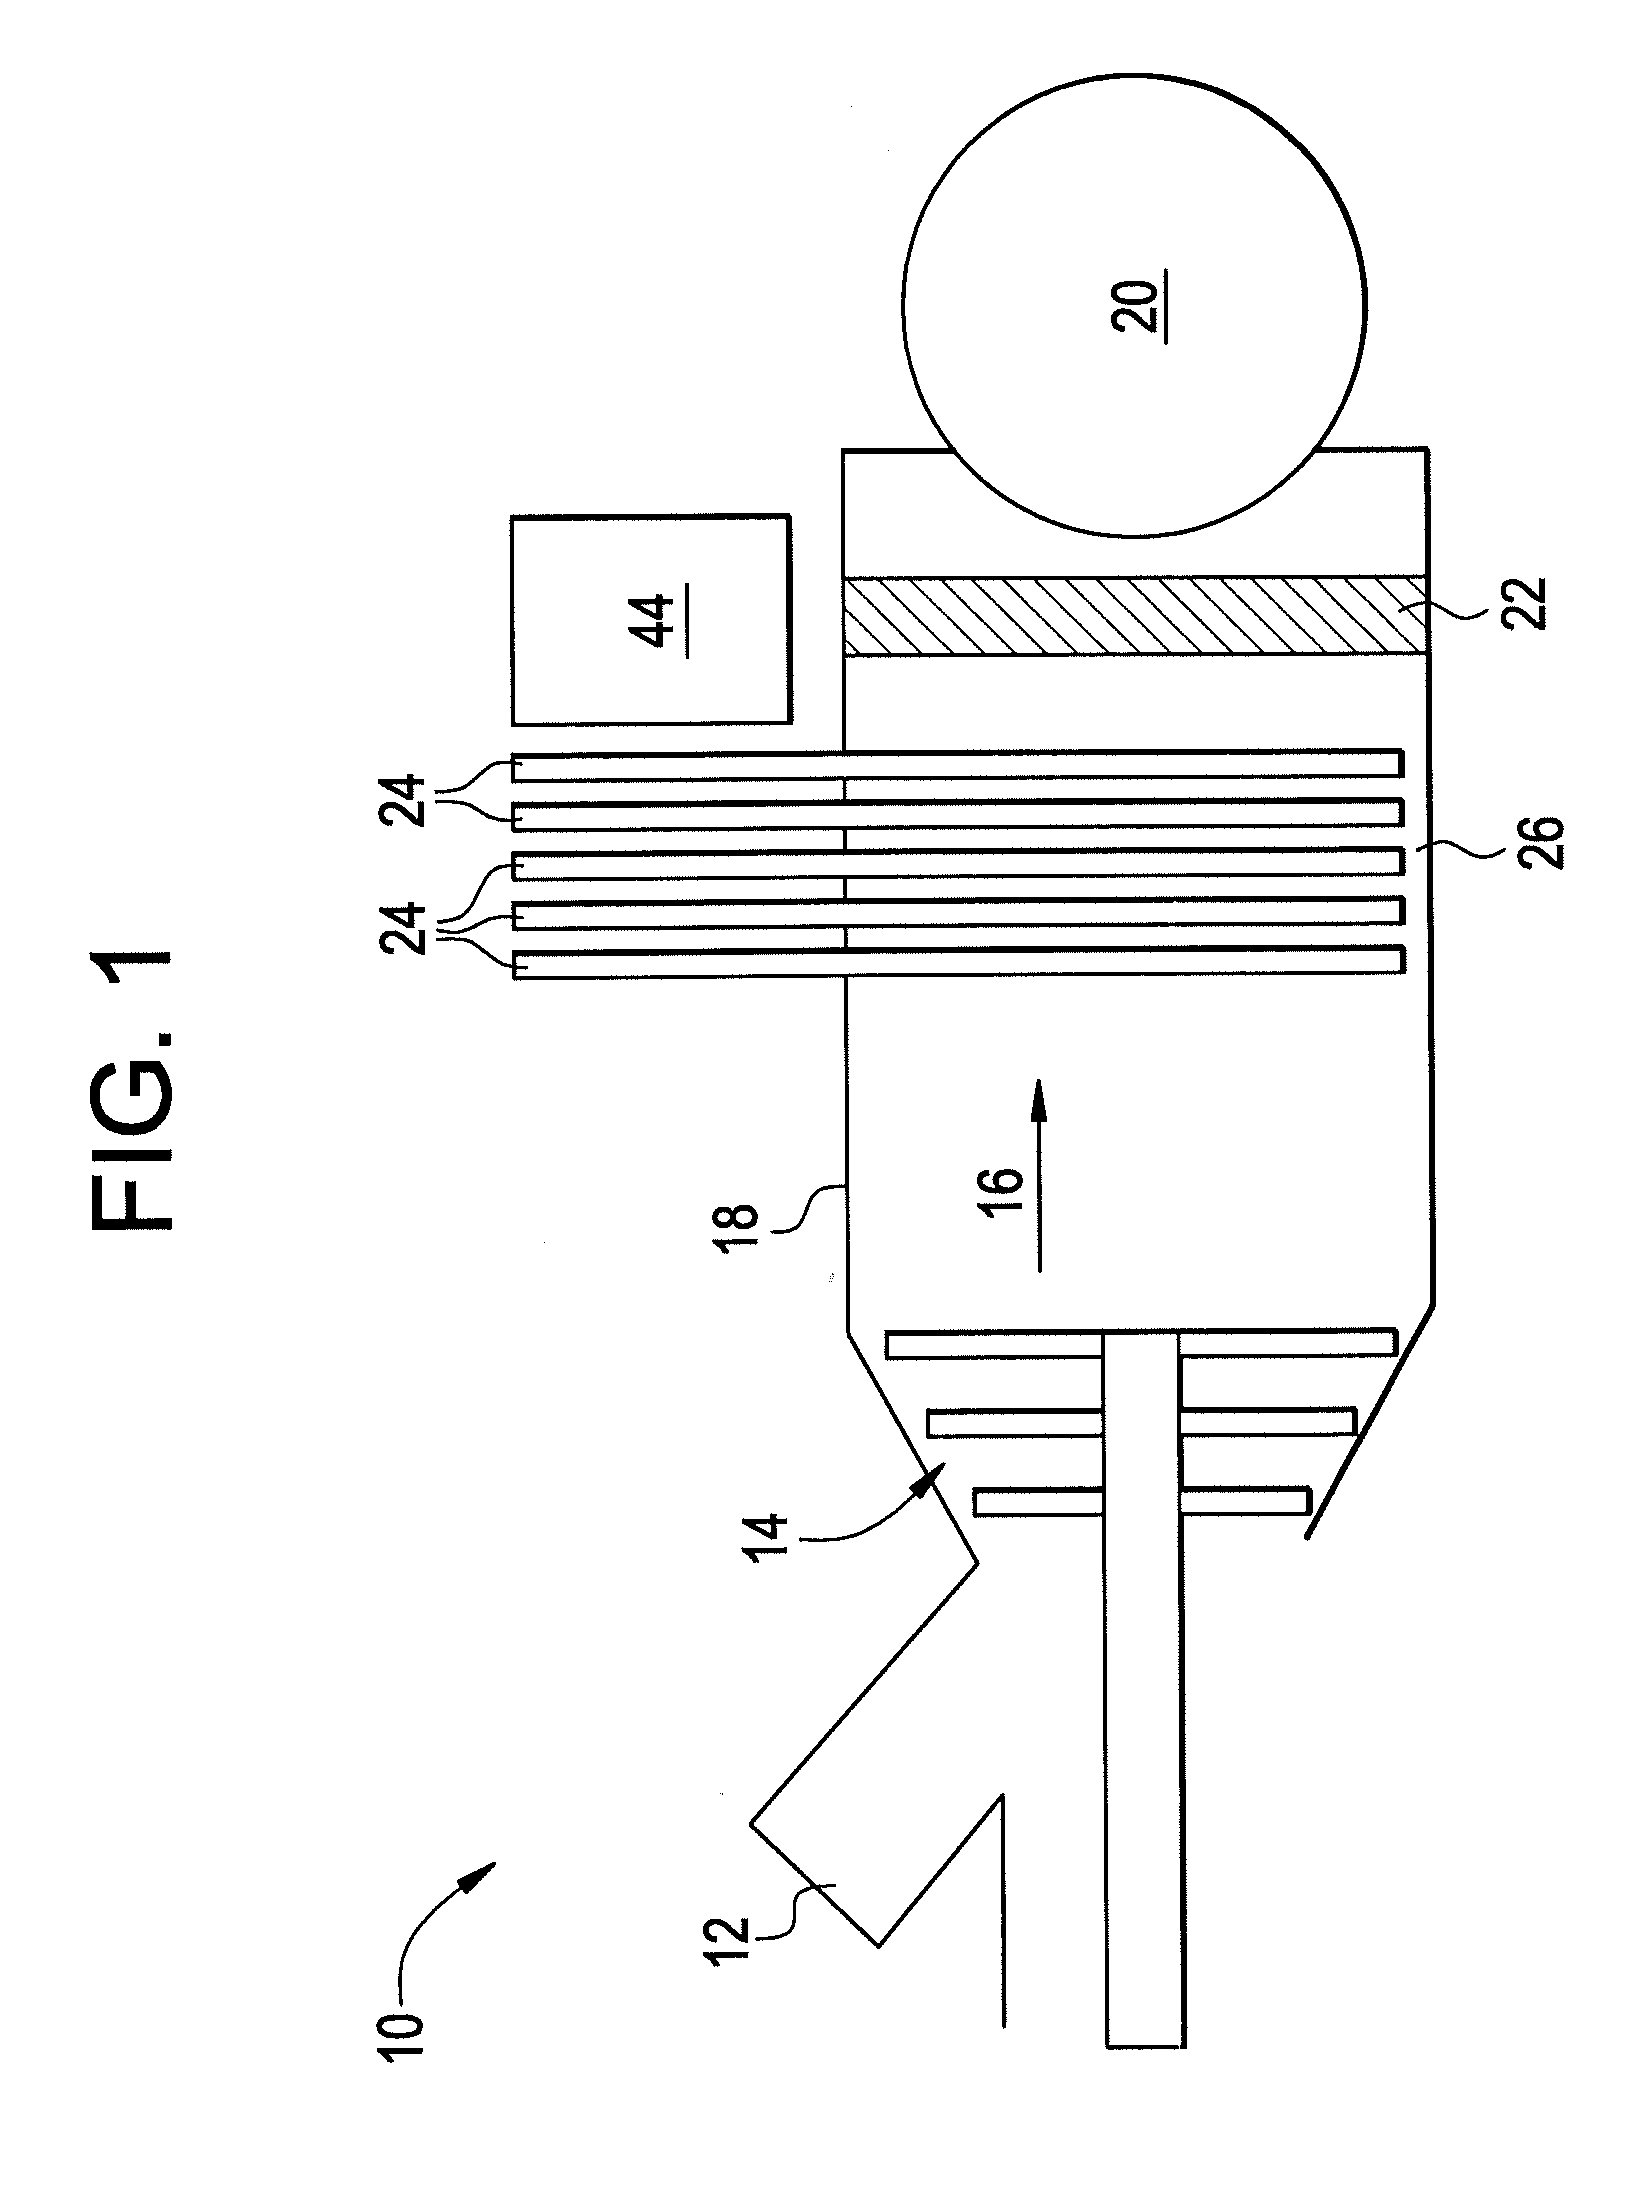 Heat pipe for removing thermal energy from exhaust gas